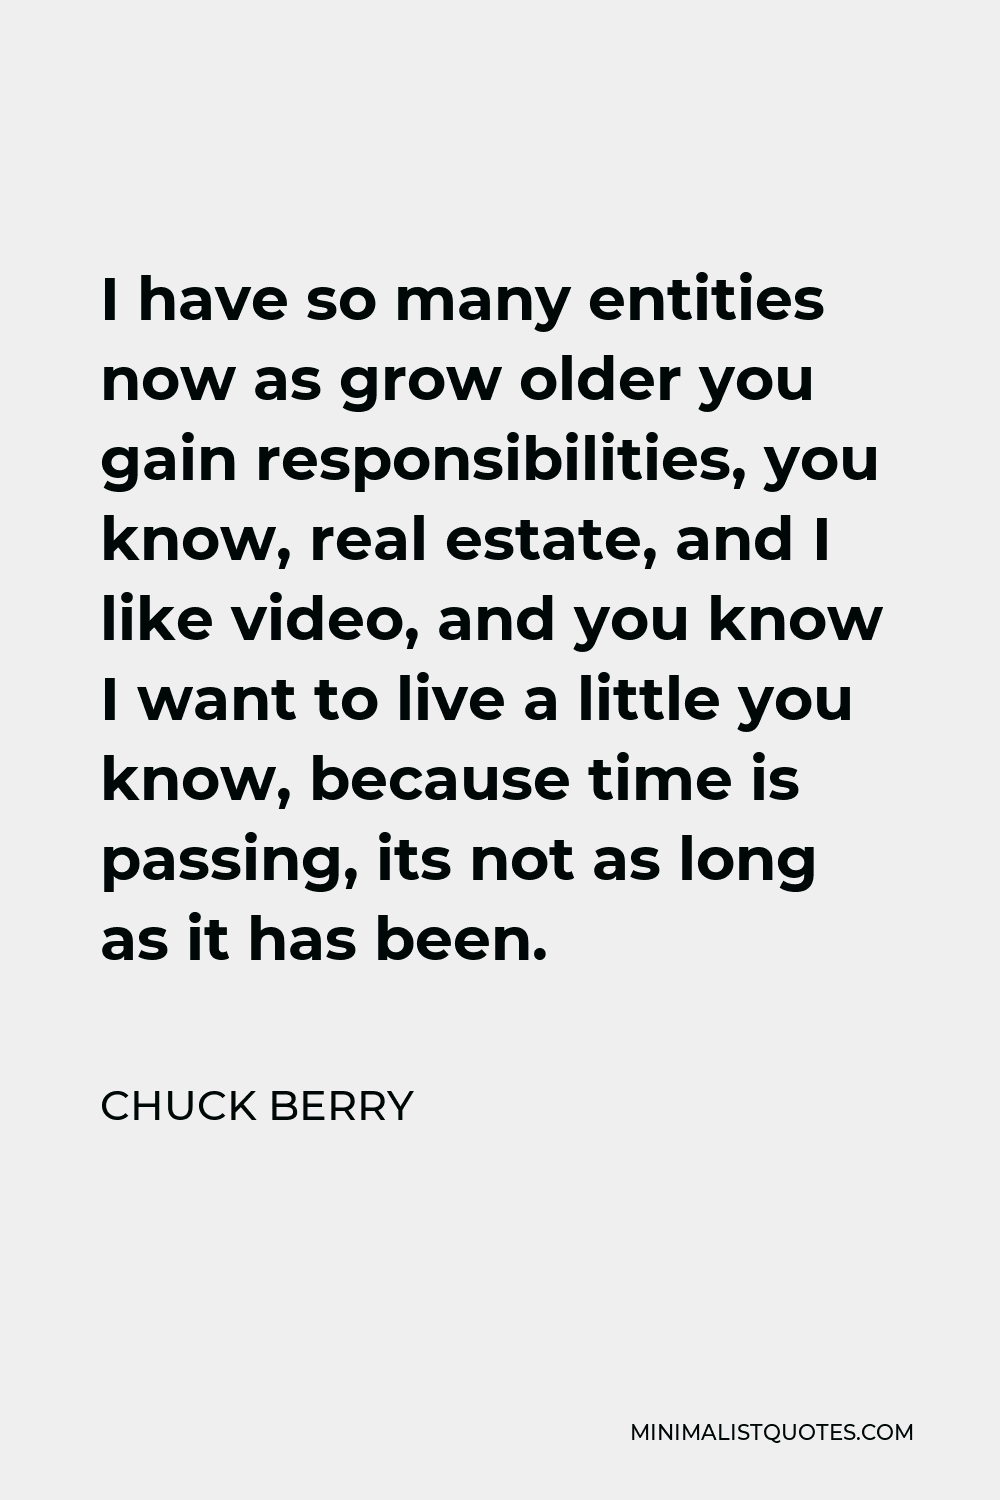 Chuck Berry Quote - I have so many entities now as grow older you gain responsibilities, you know, real estate, and I like video, and you know I want to live a little you know, because time is passing, its not as long as it has been.